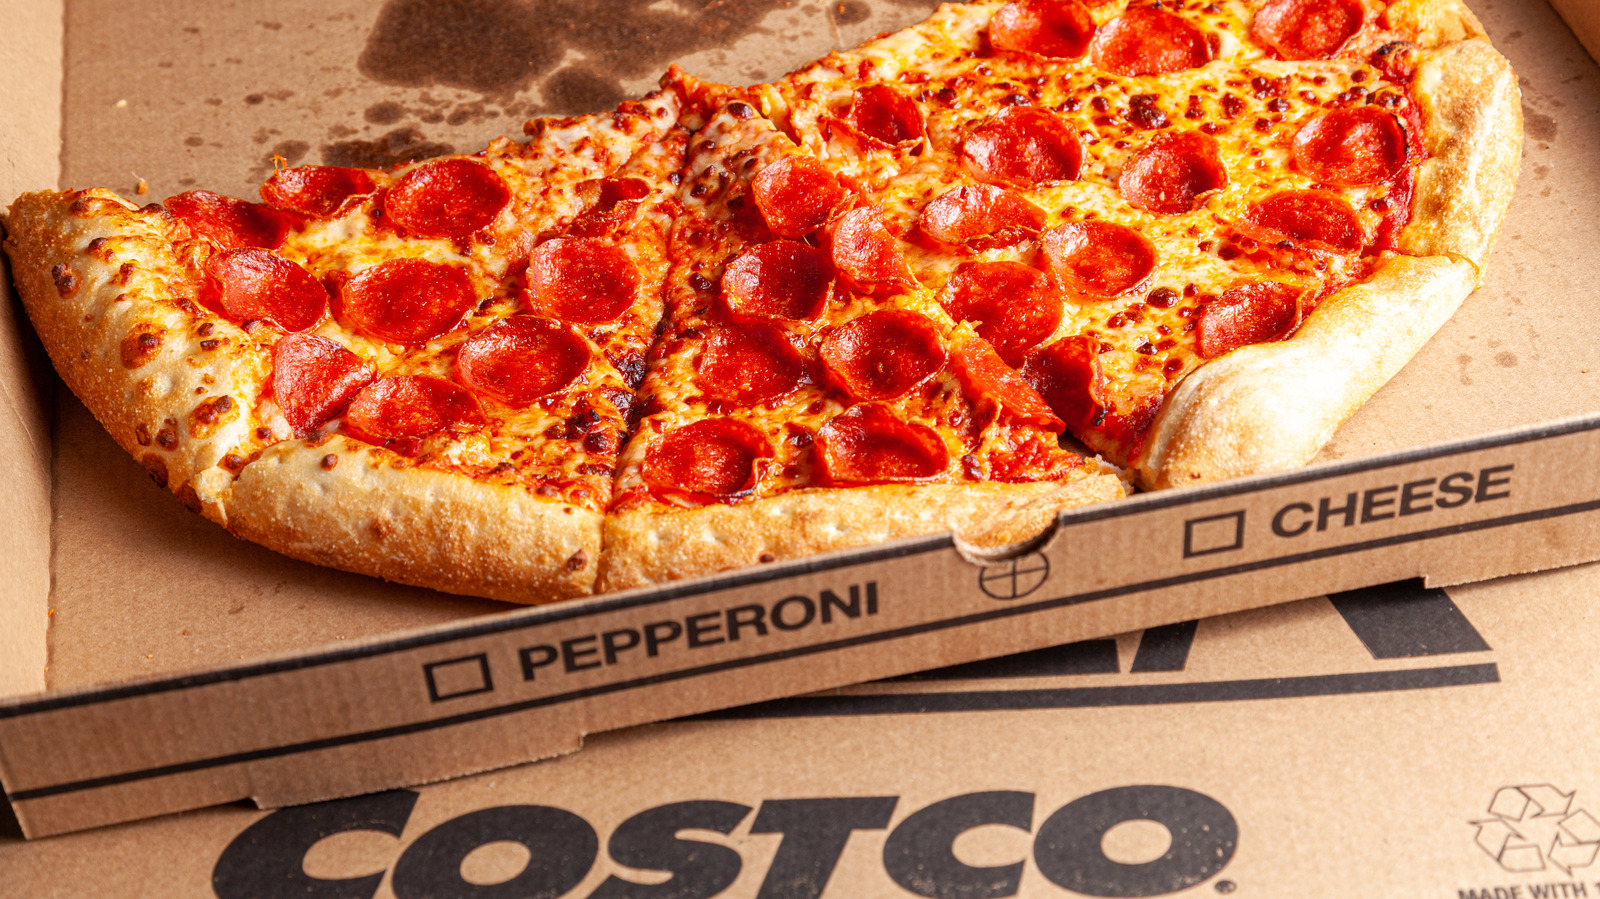 How many slices are in Costco's food court pizza?